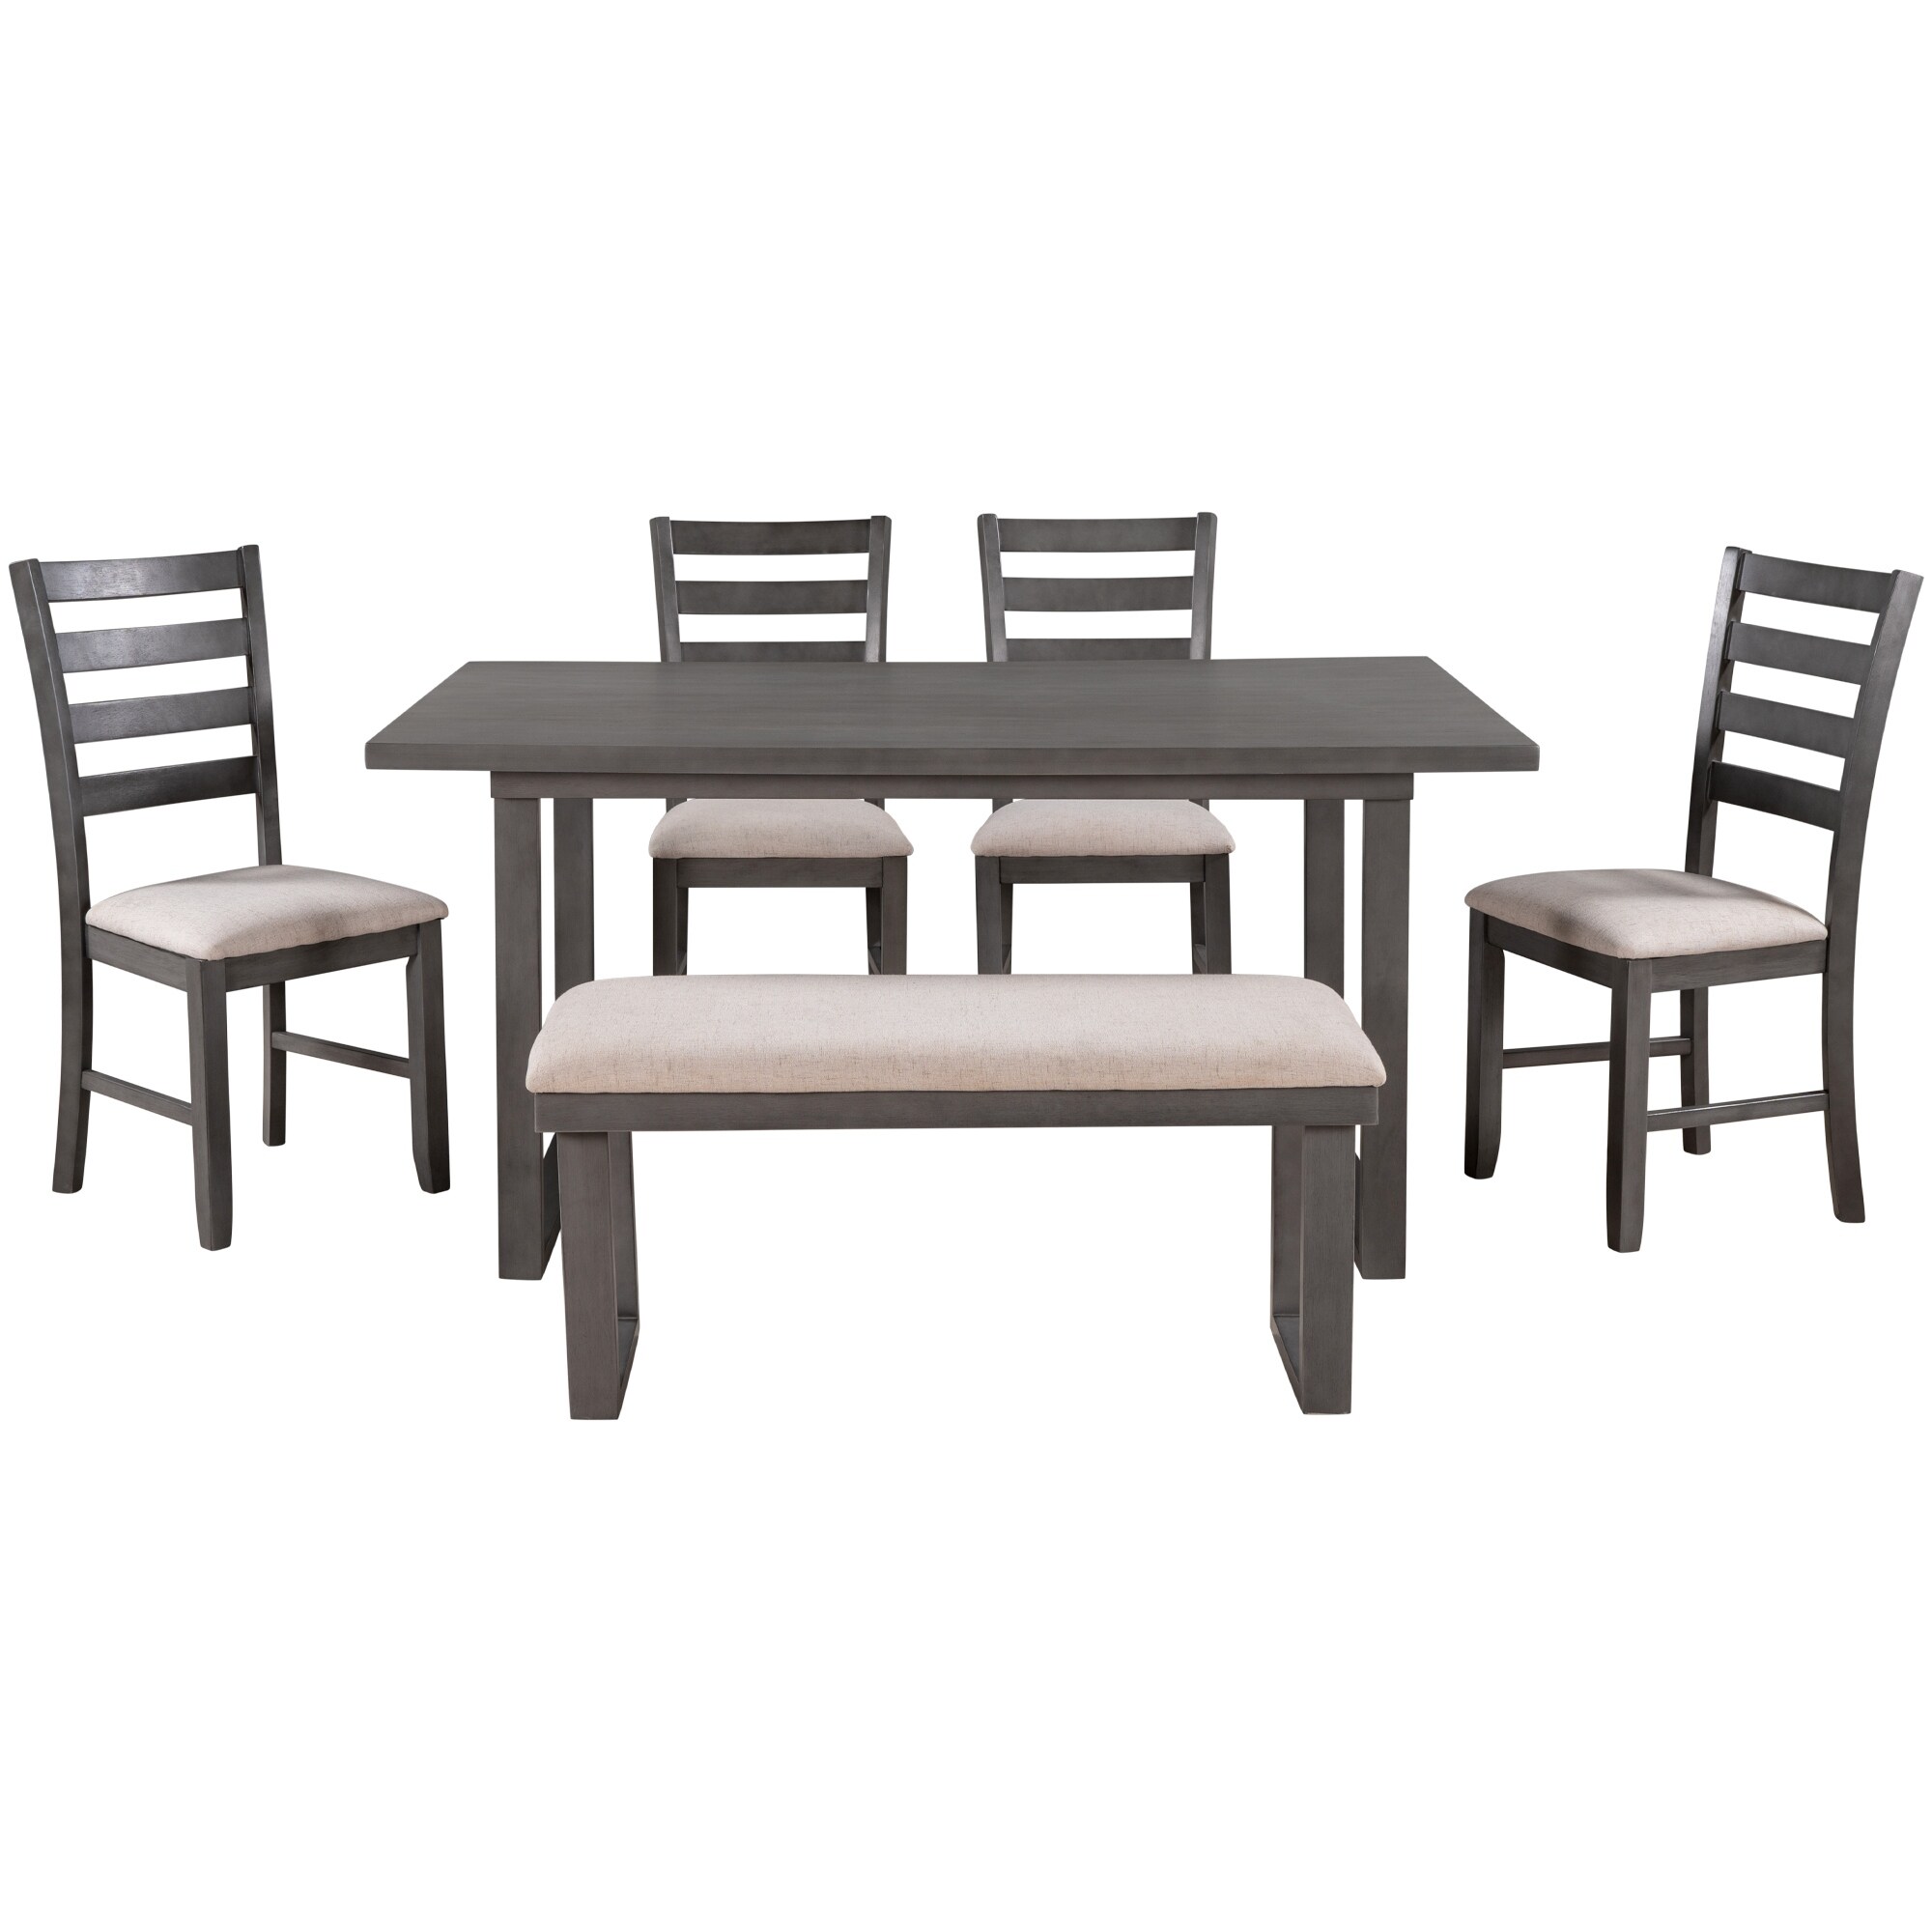 Merax Dining Table Sets, 6 Piece Wood Kitchen Table Set, Home Furniture Table Set with Chairs & Bench (White + Cherry)